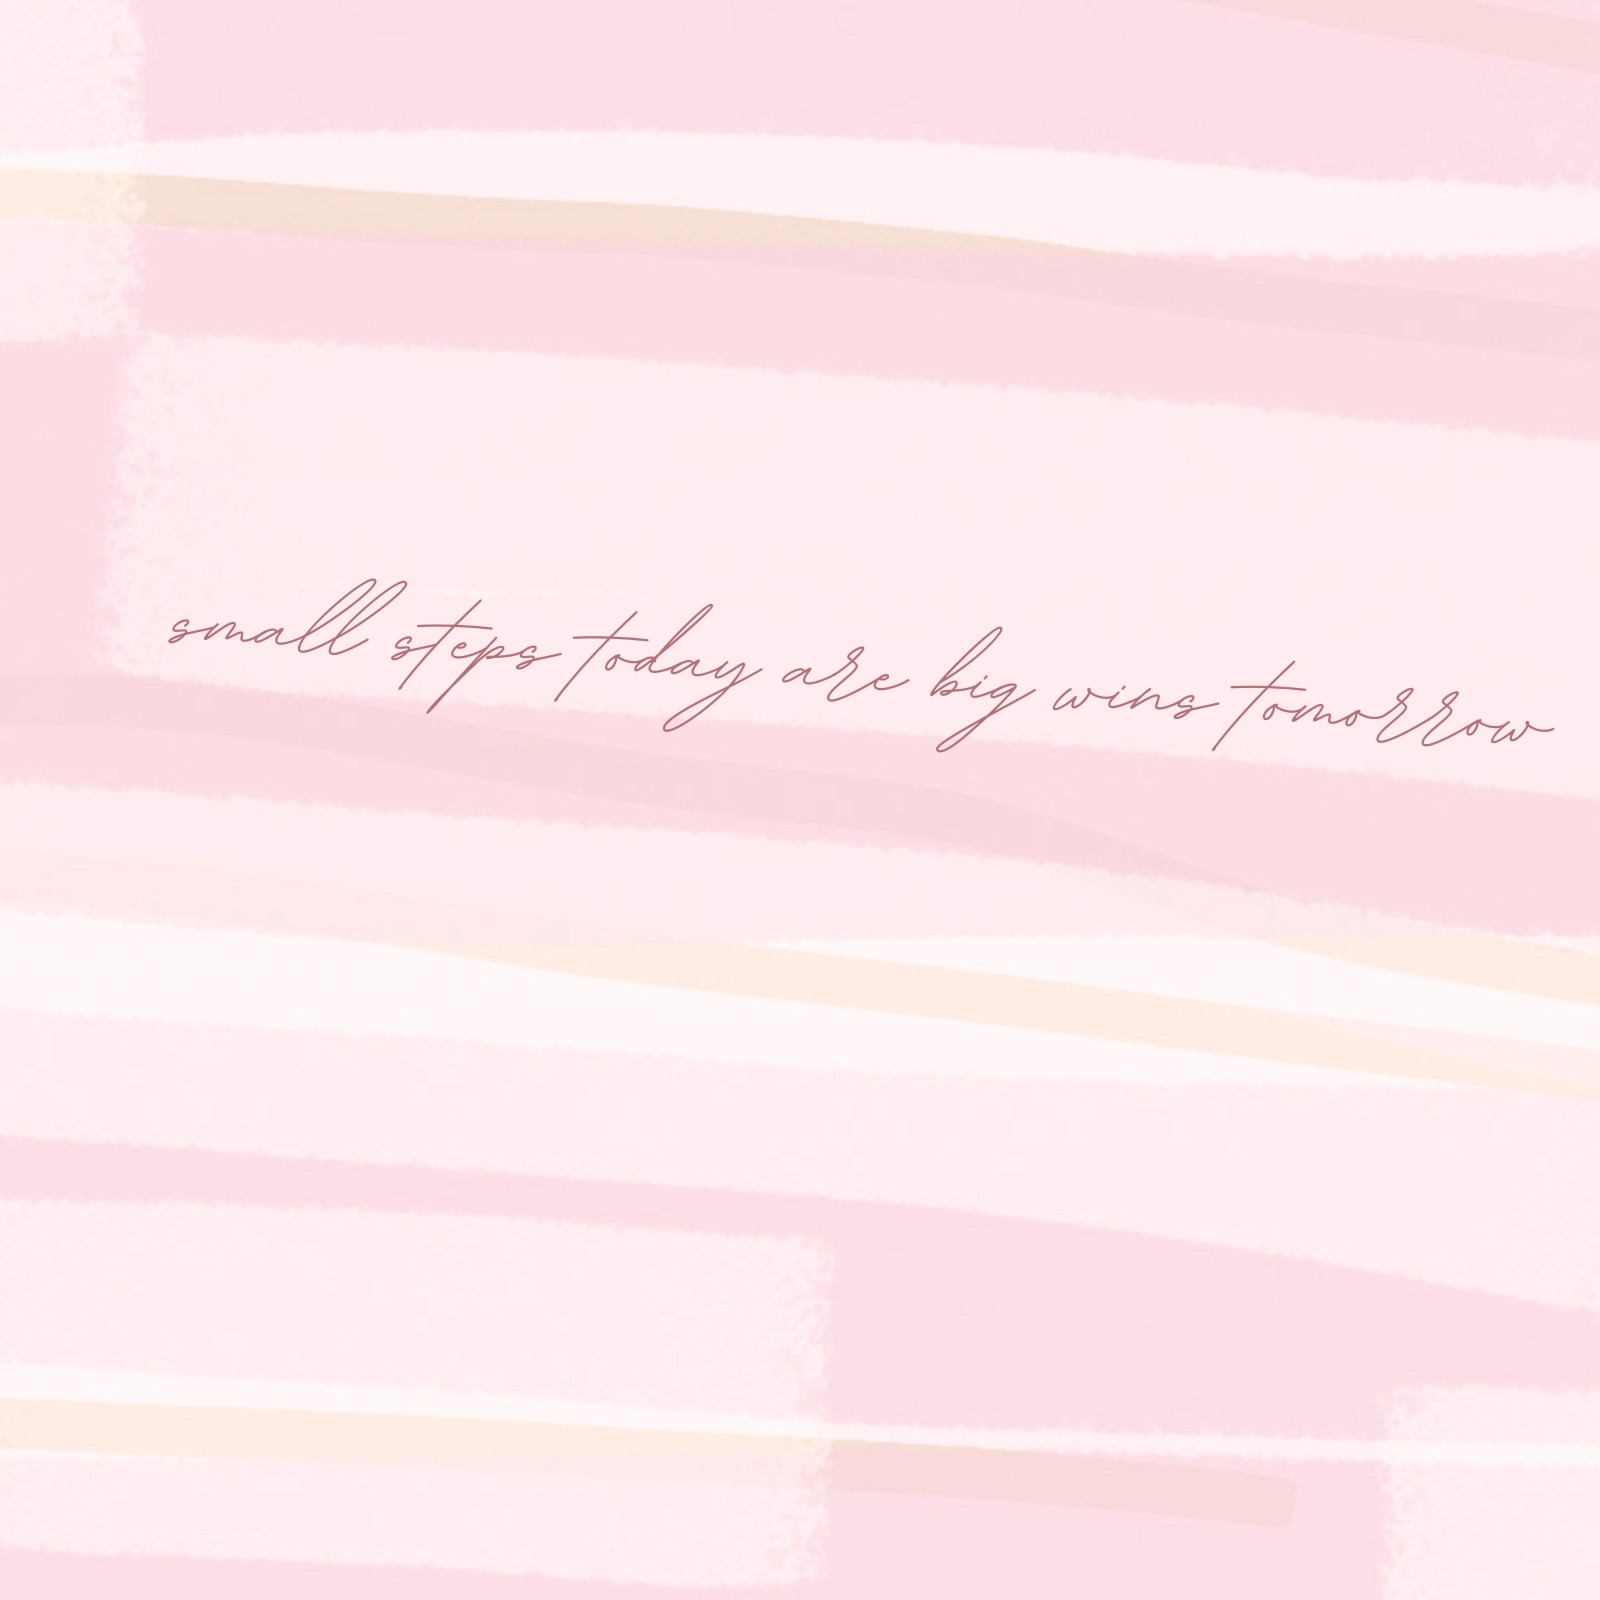 Page 2 - Free and customizable pink background templates